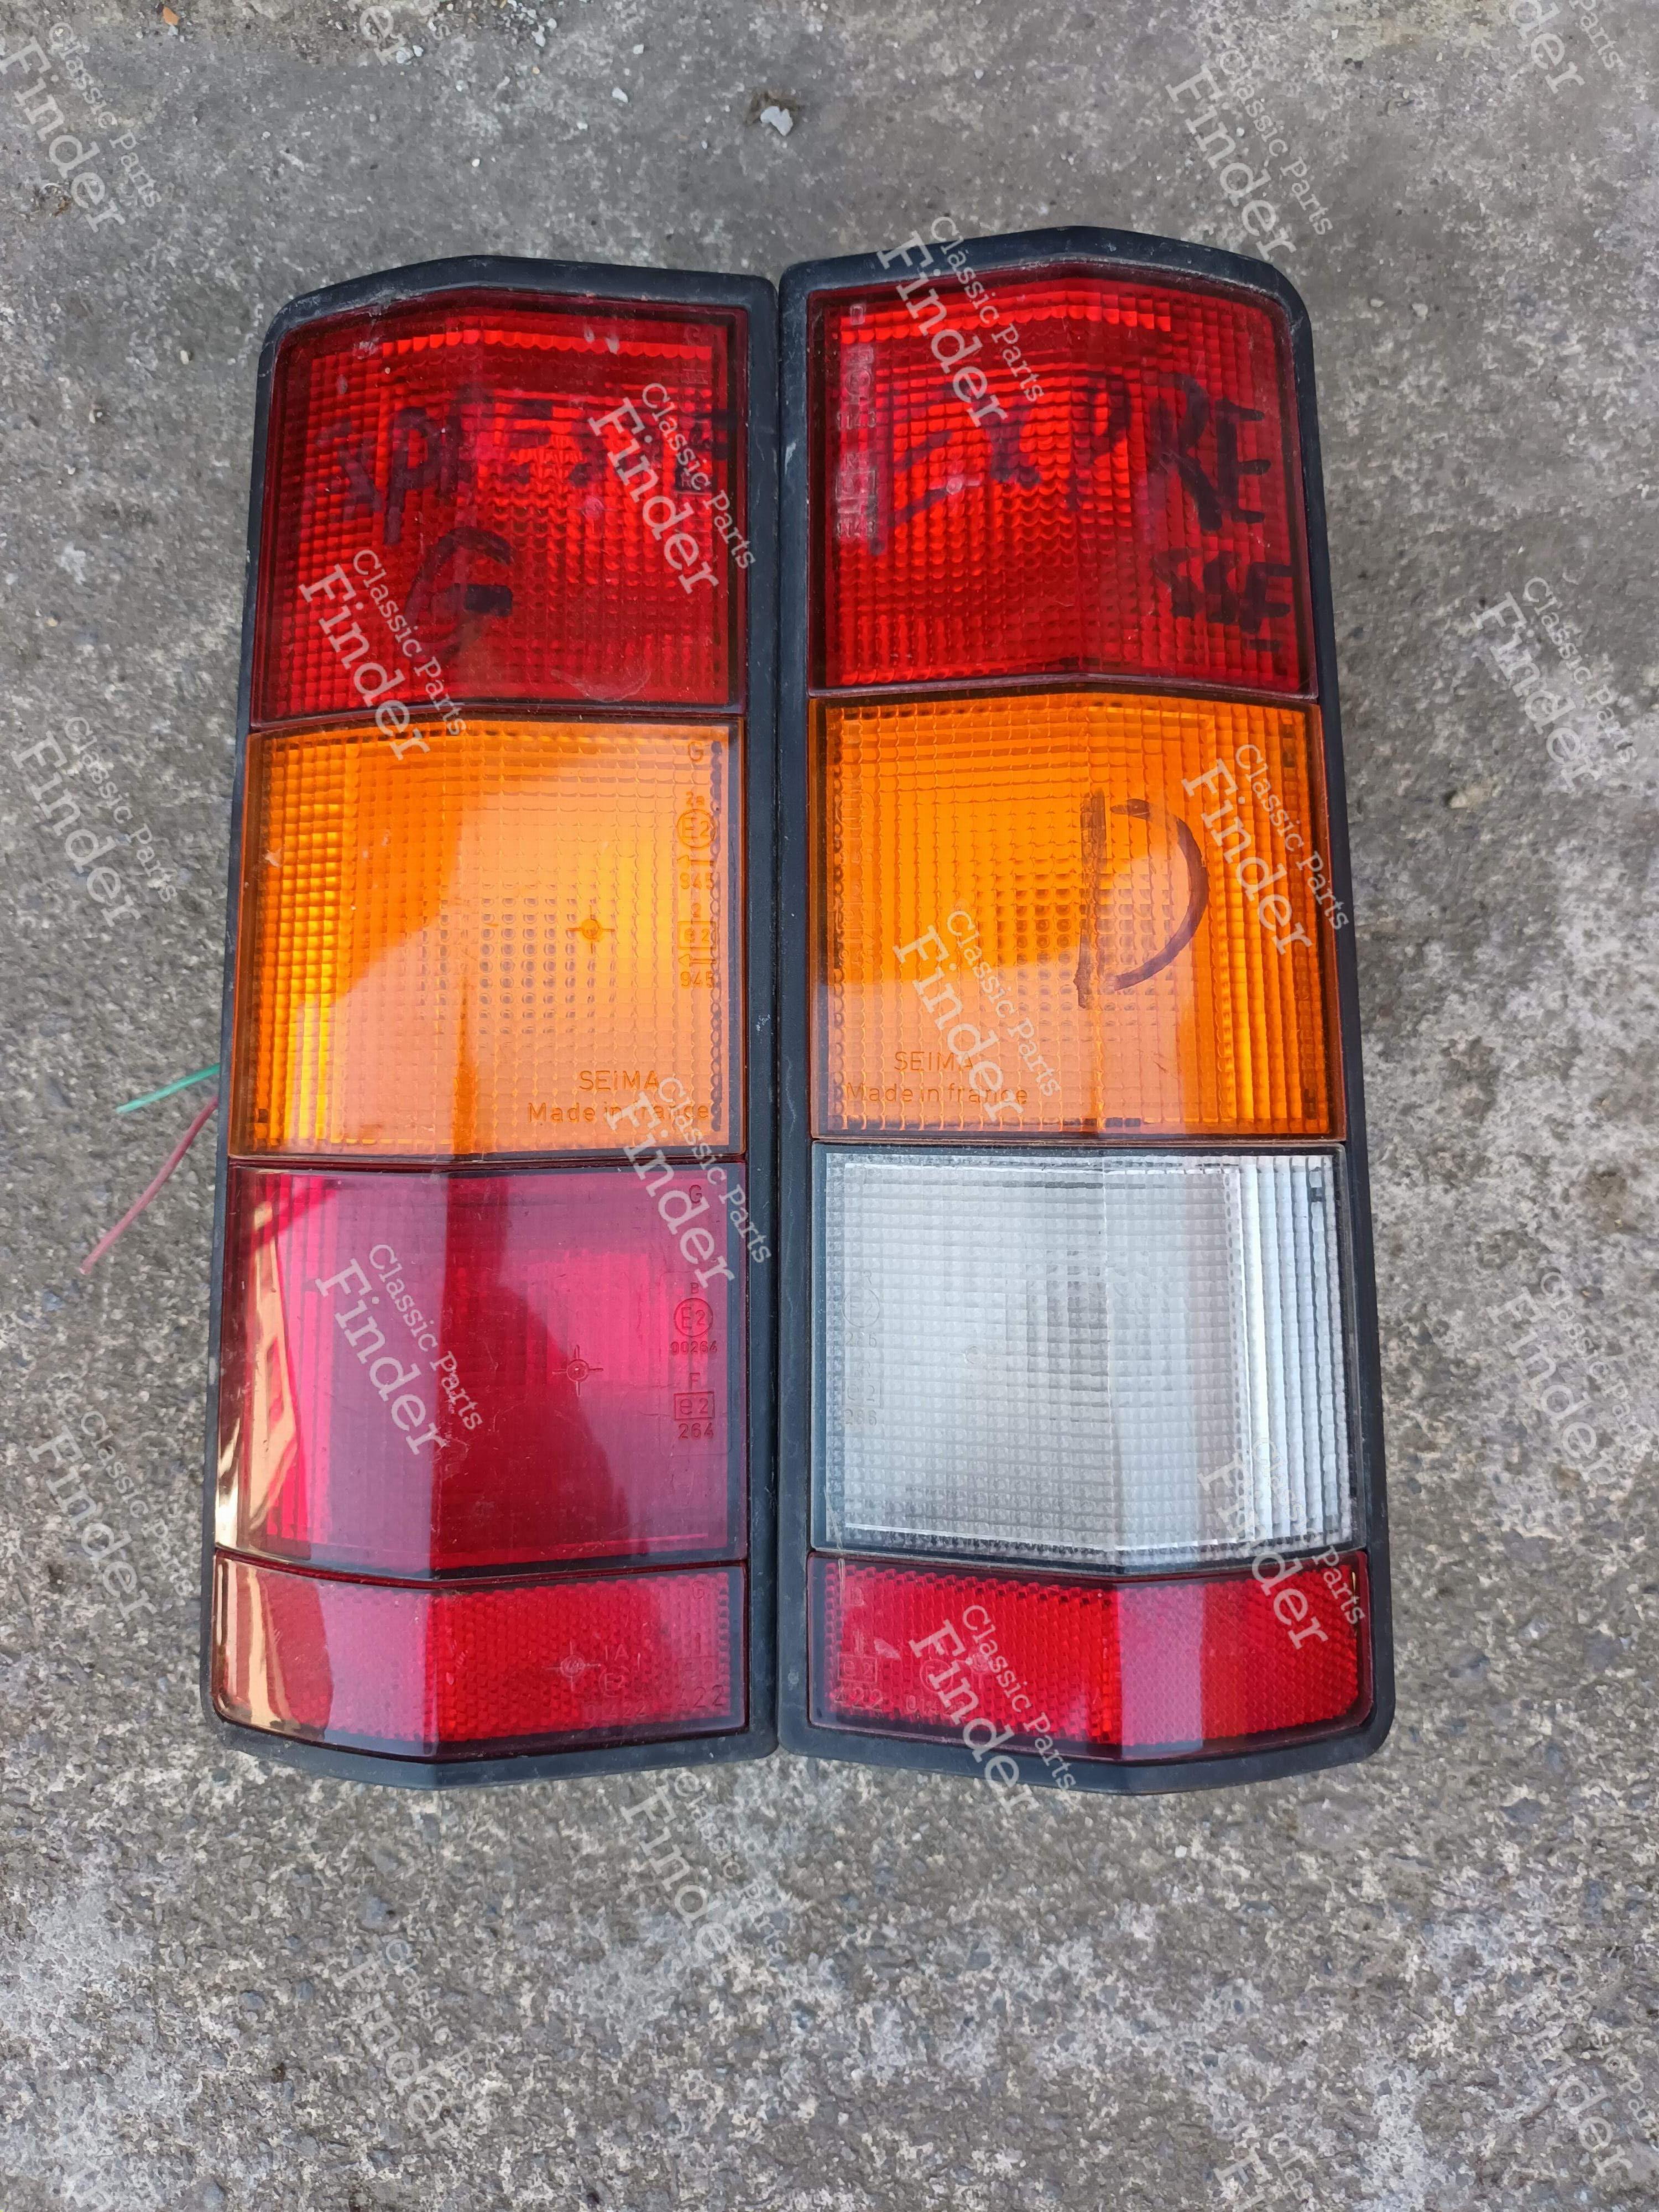 Express tail lights - RENAULT 5 (Supercinq) / Express / Rapid / Extra (R5)